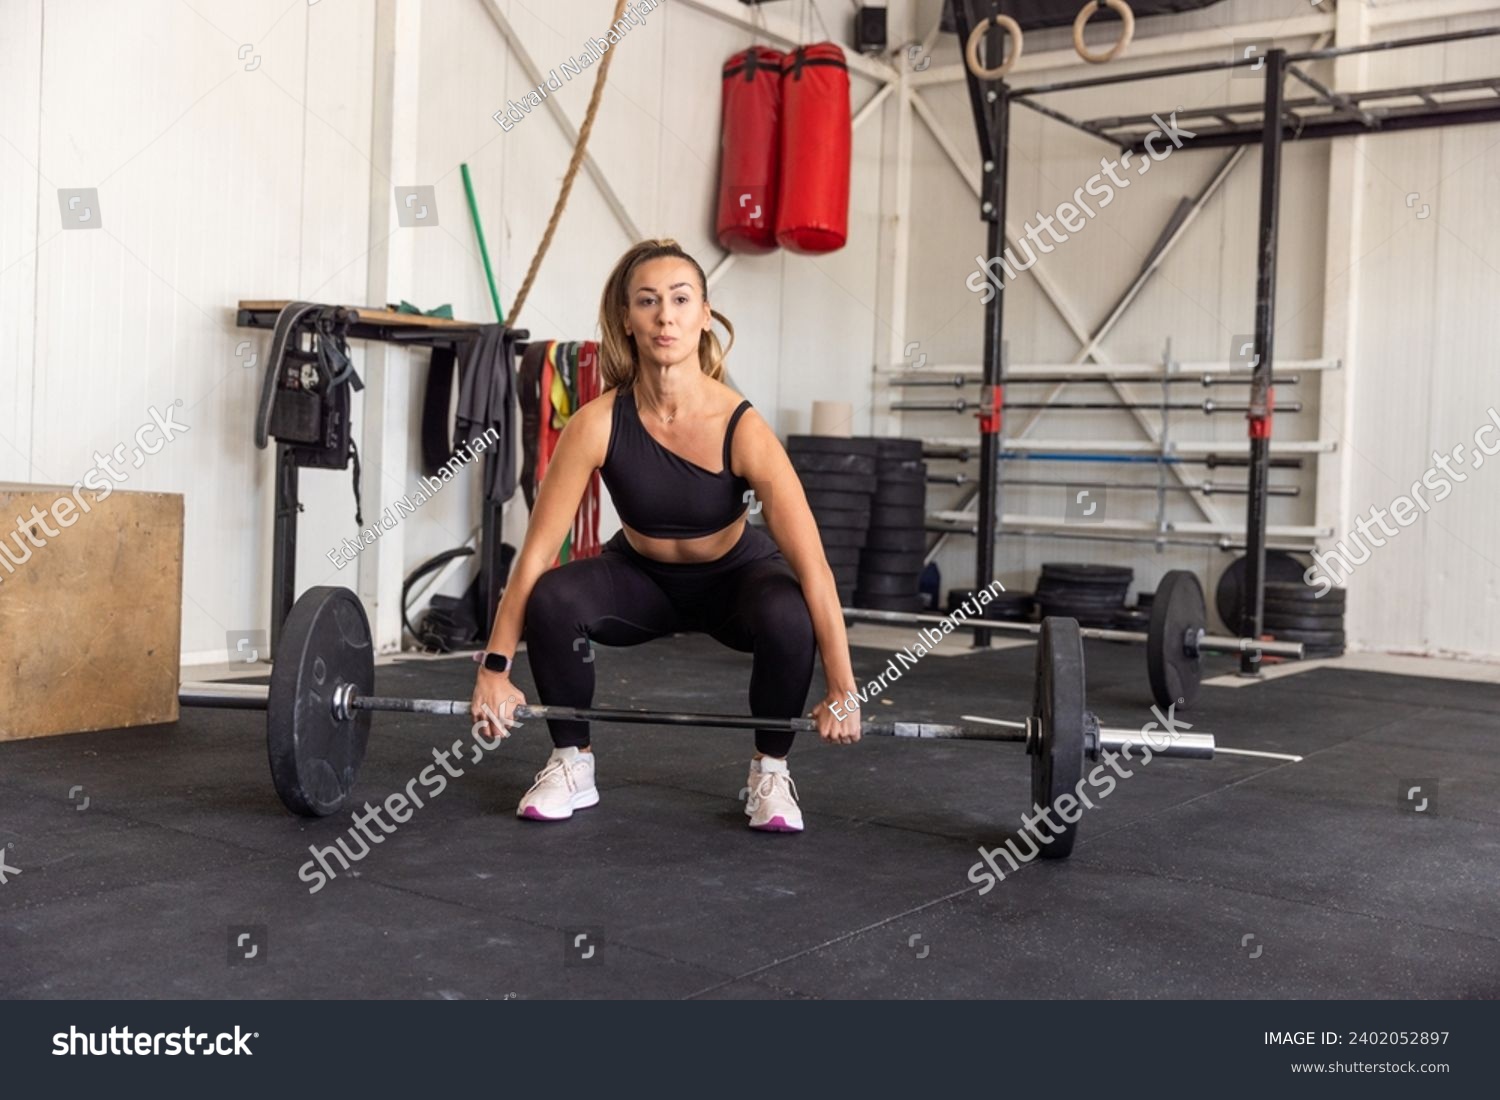 Fitness woman lifting barbell in the gym